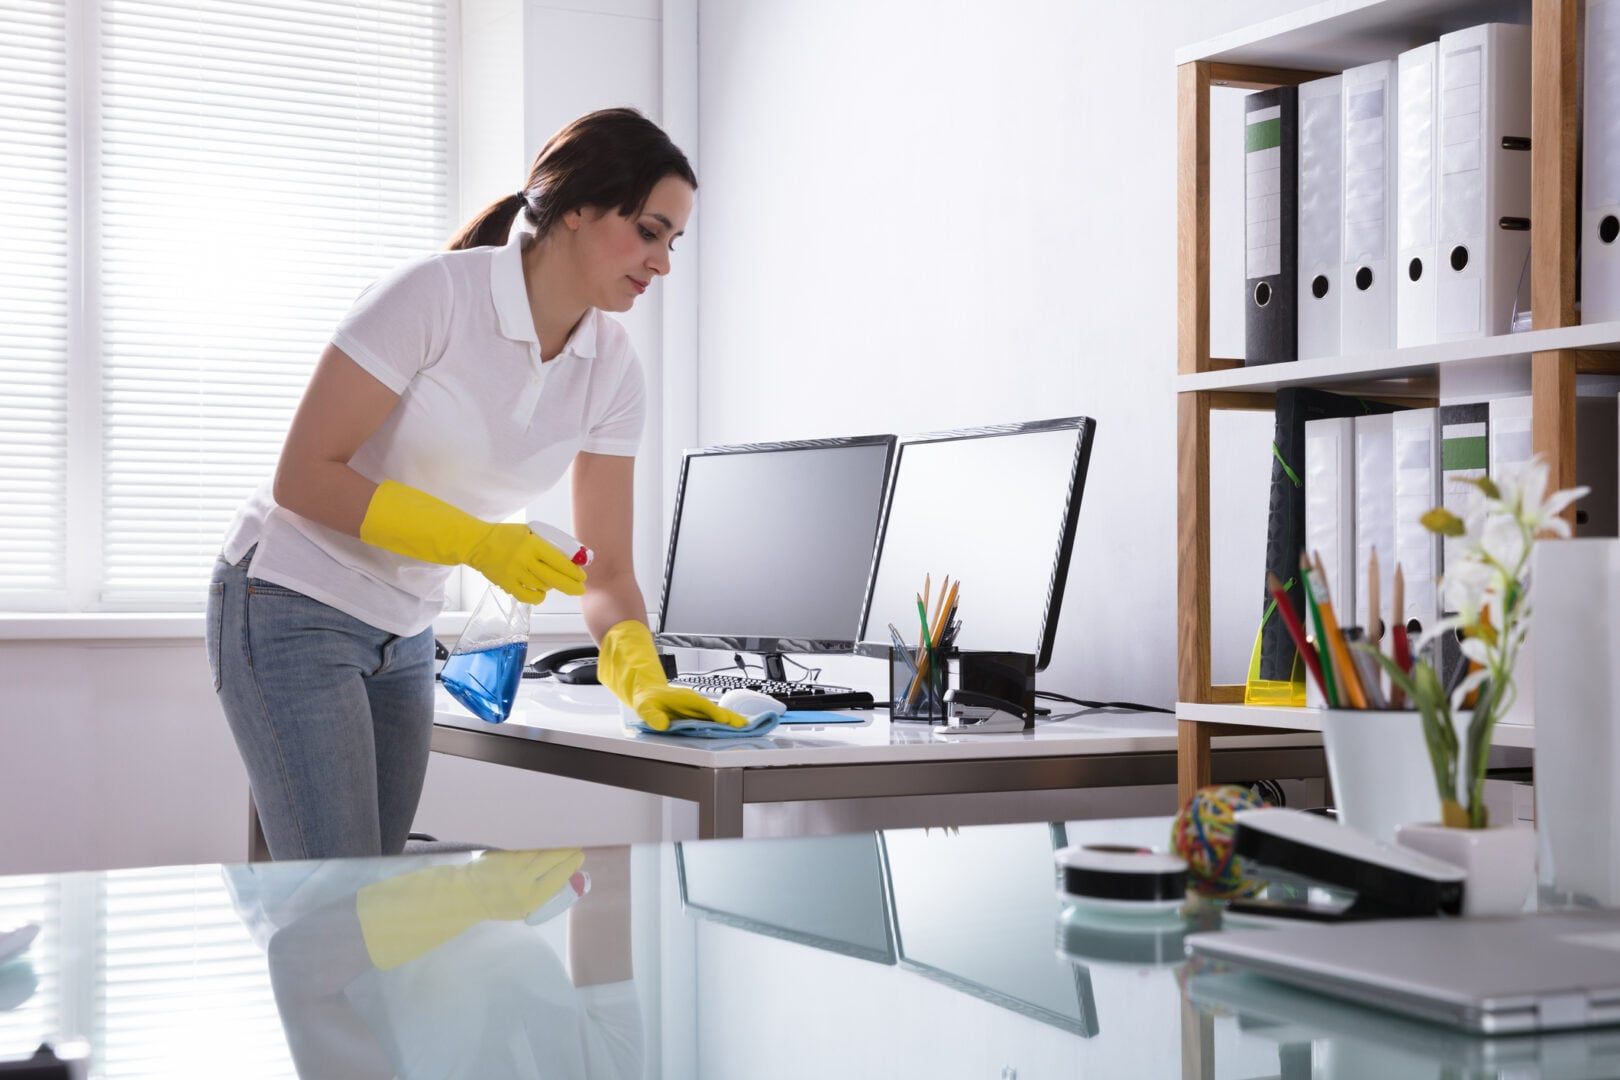 Why hiring a house cleaner is completely worth it, according to former skeptics